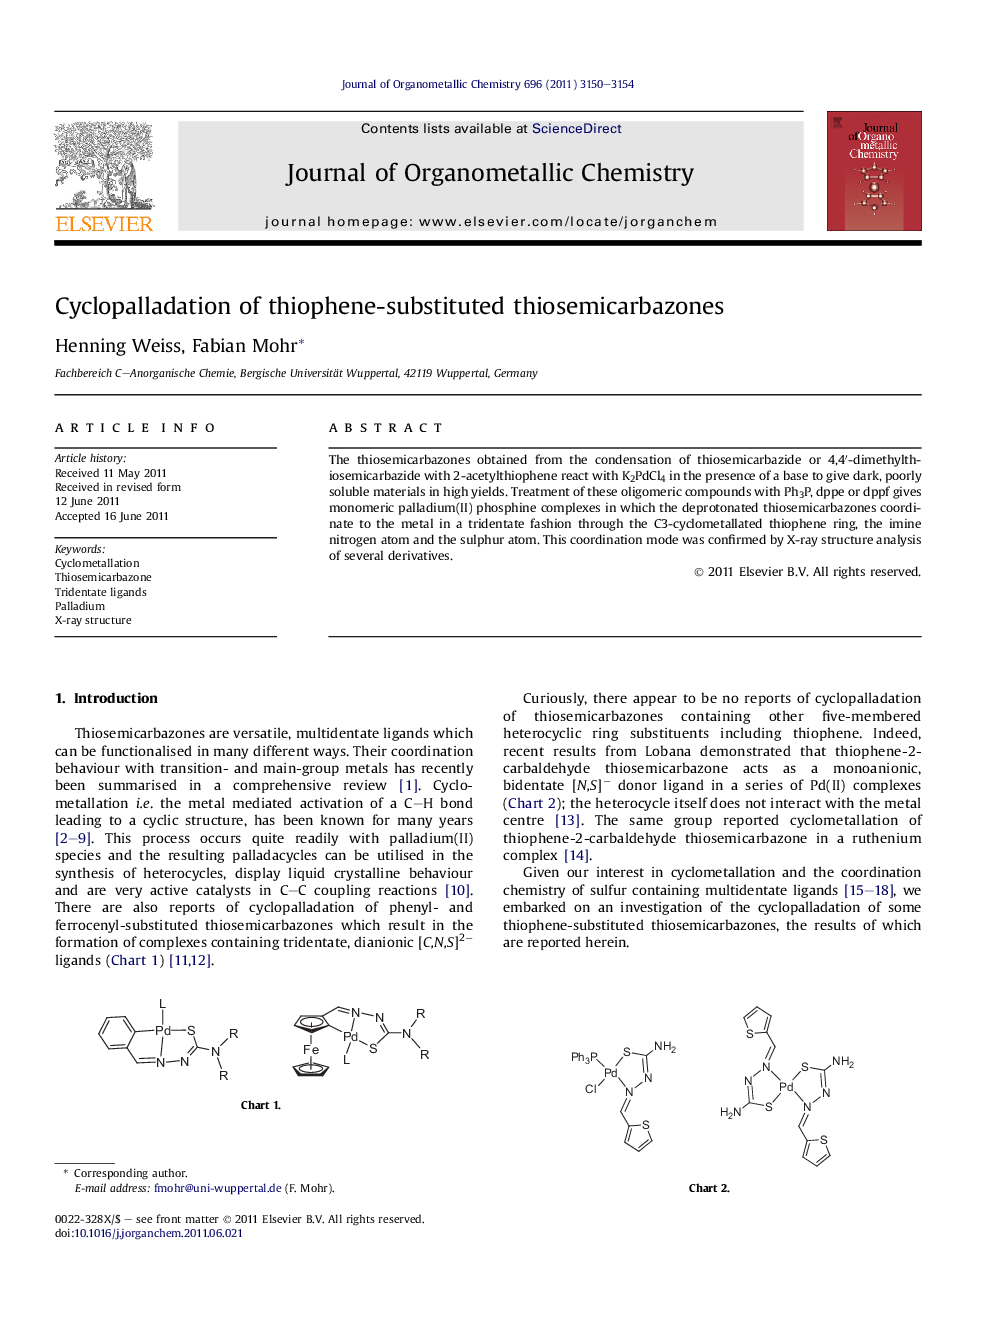 Cyclopalladation of thiophene-substituted thiosemicarbazones